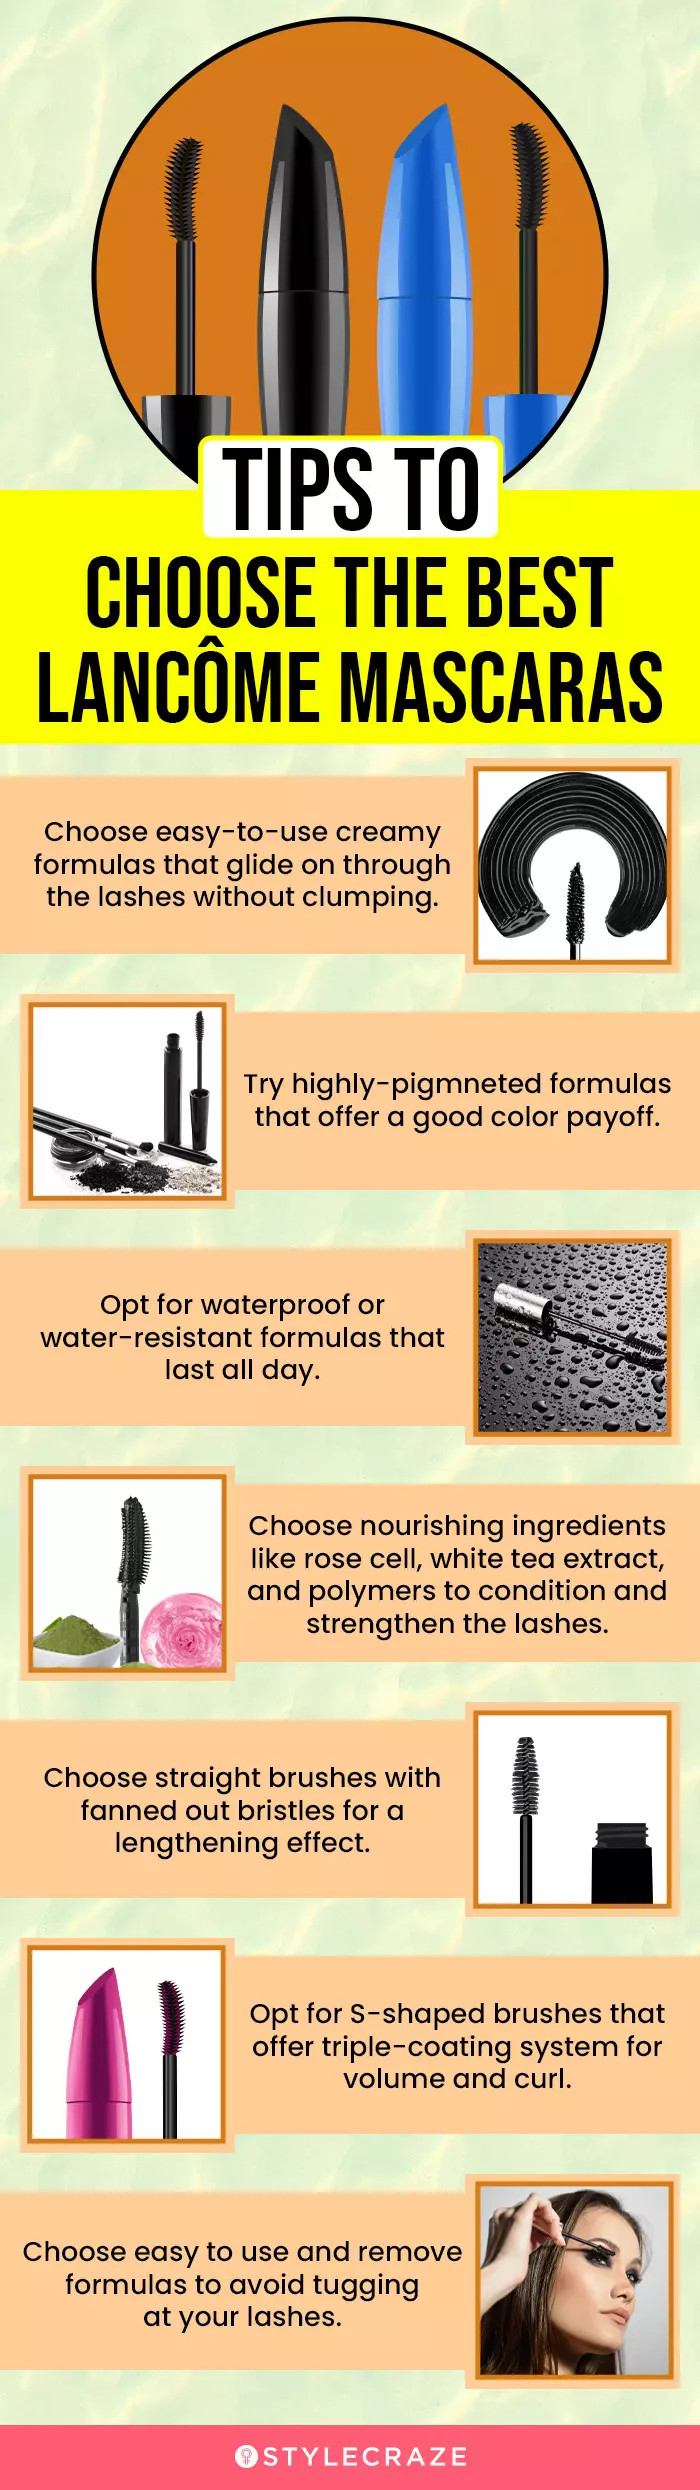 Tips To Choose The Best Lancôme Mascaras (infographic)